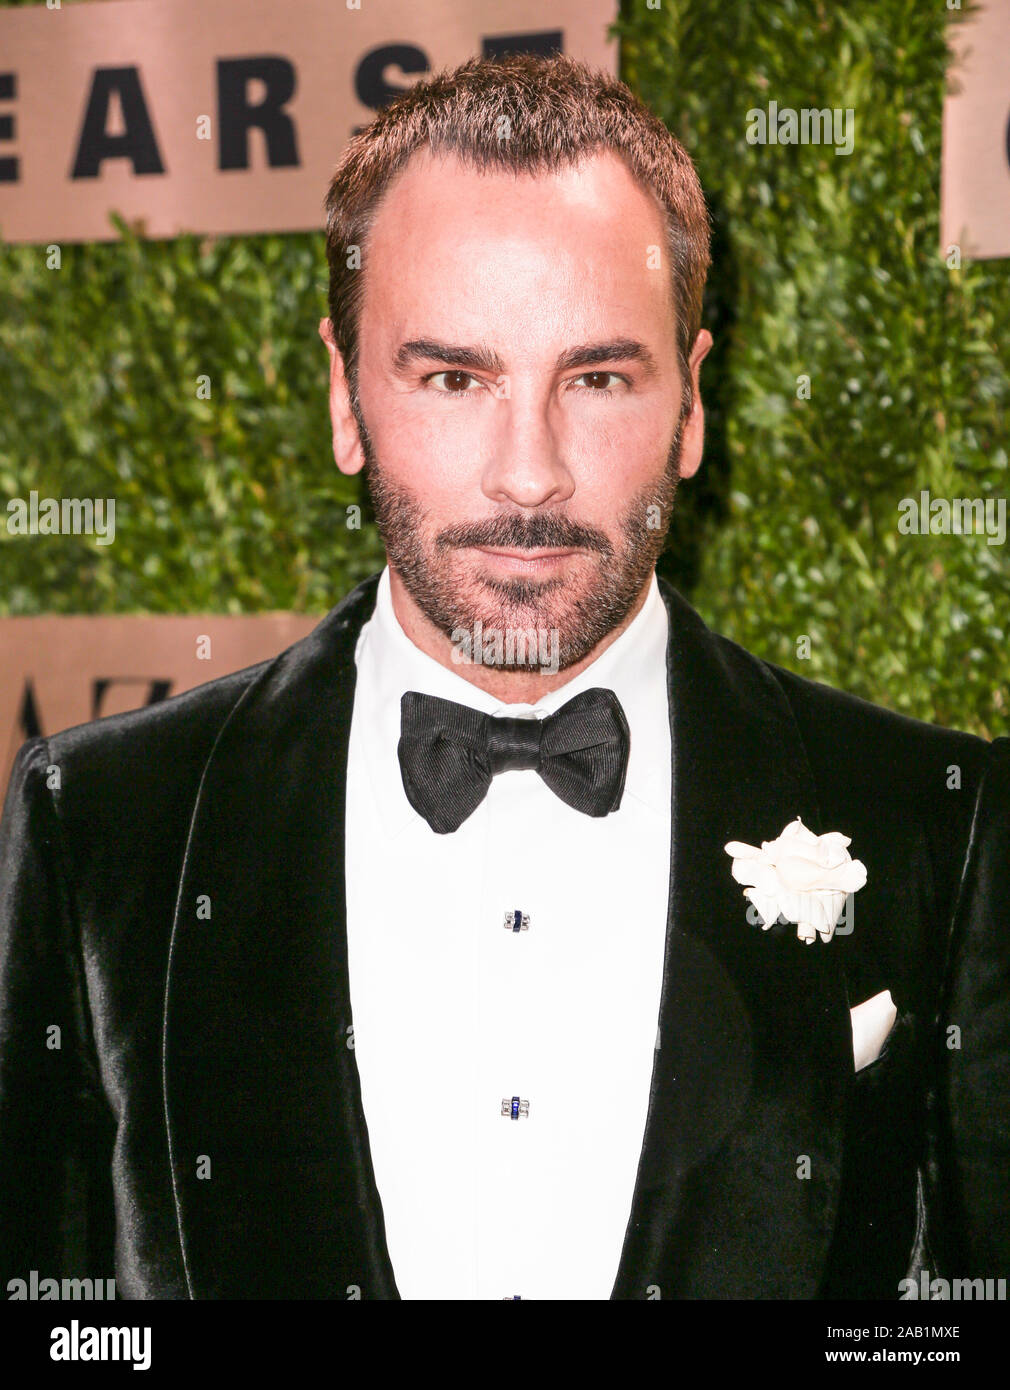 New York, NY - November 18, 2019: Tom Ford attends the Lincoln Center  Corporate Fund Fashion Gala honoring Leonard A. Lauder at Alice Tully Hall  Stock Photo - Alamy